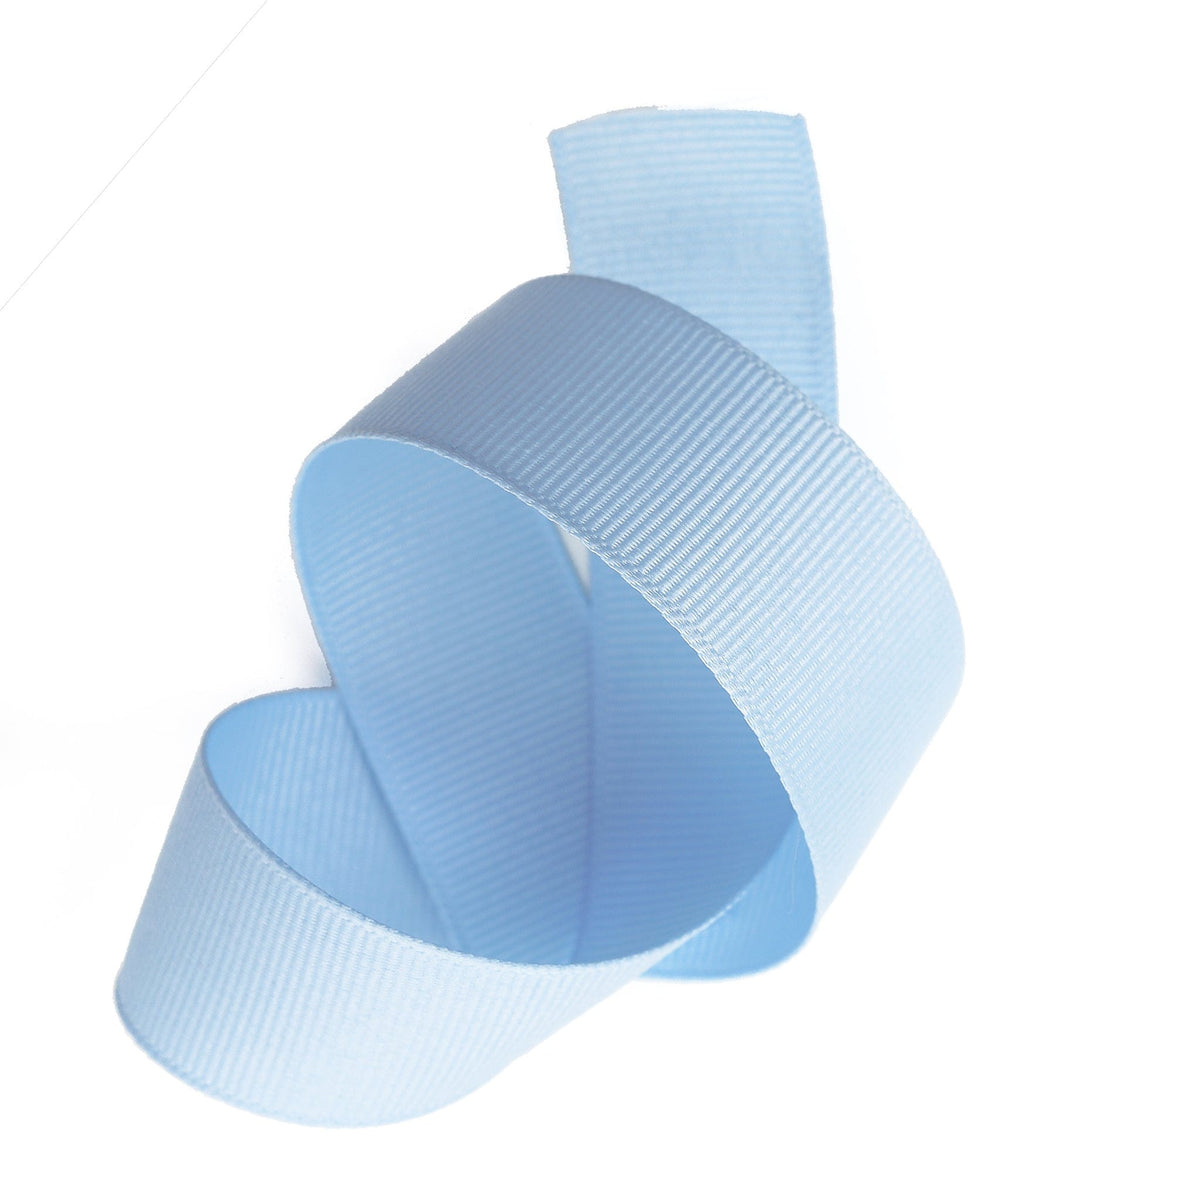 Powder Blue A4 Deep Magnetic Gift Boxes With Changeable Ribbon